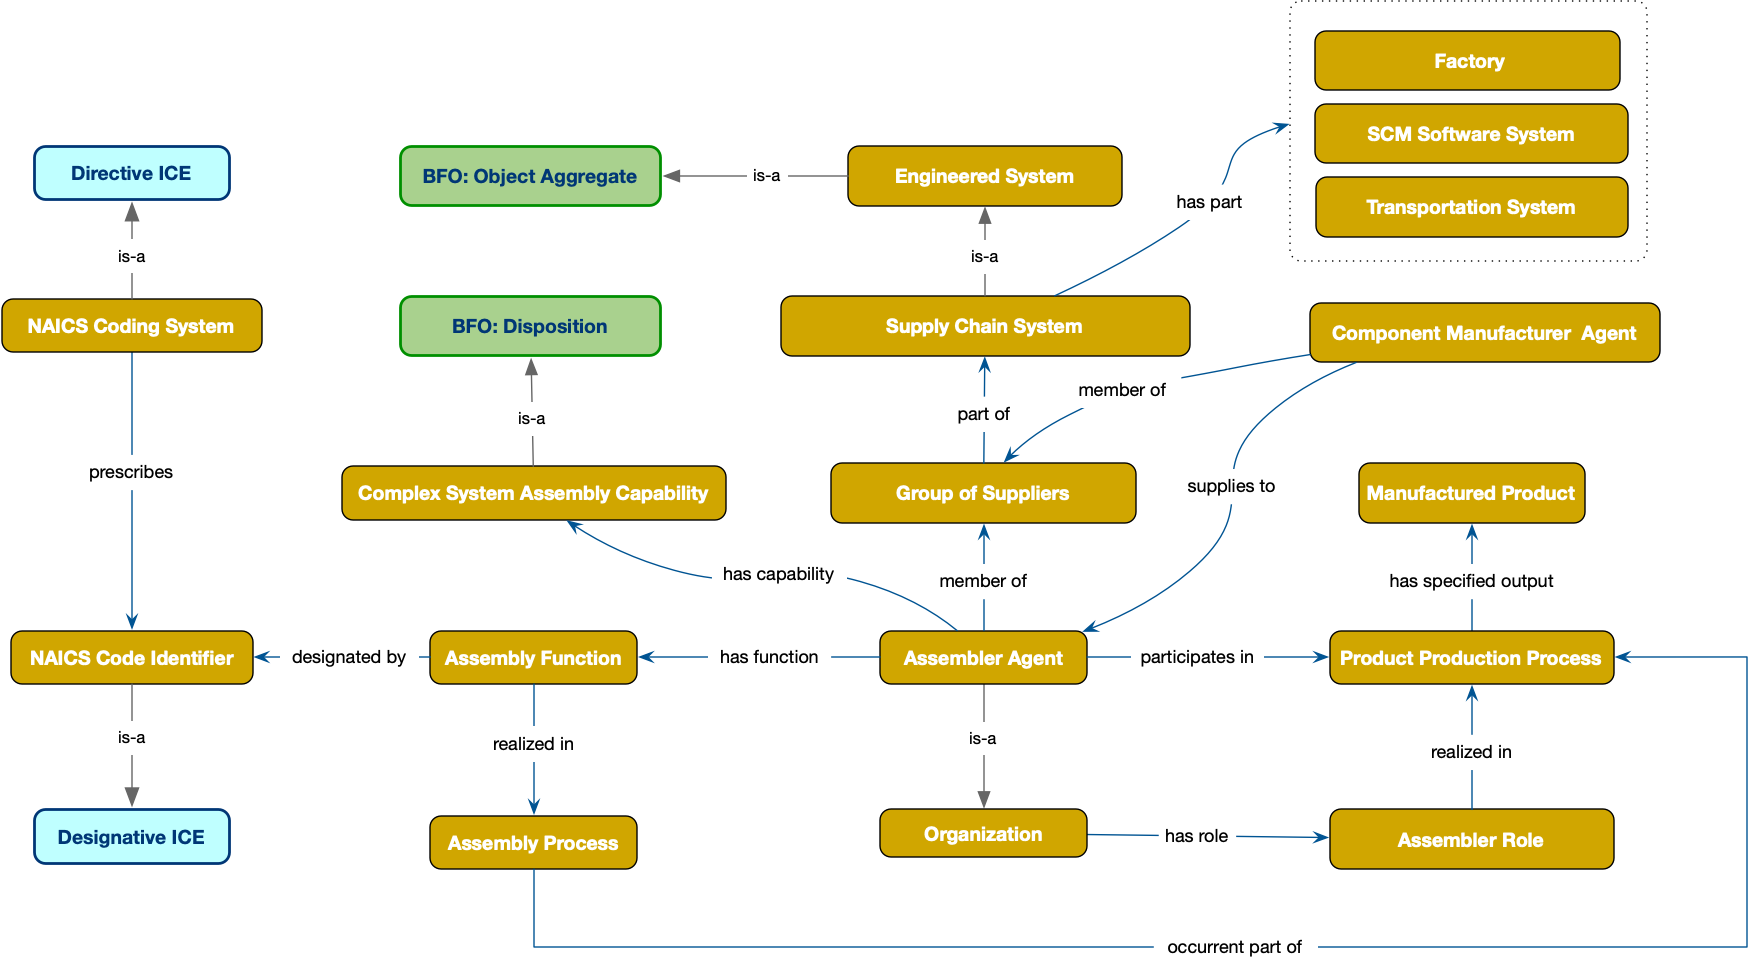 overview of some of the core classes in their relationships in the SC Reference Ontology